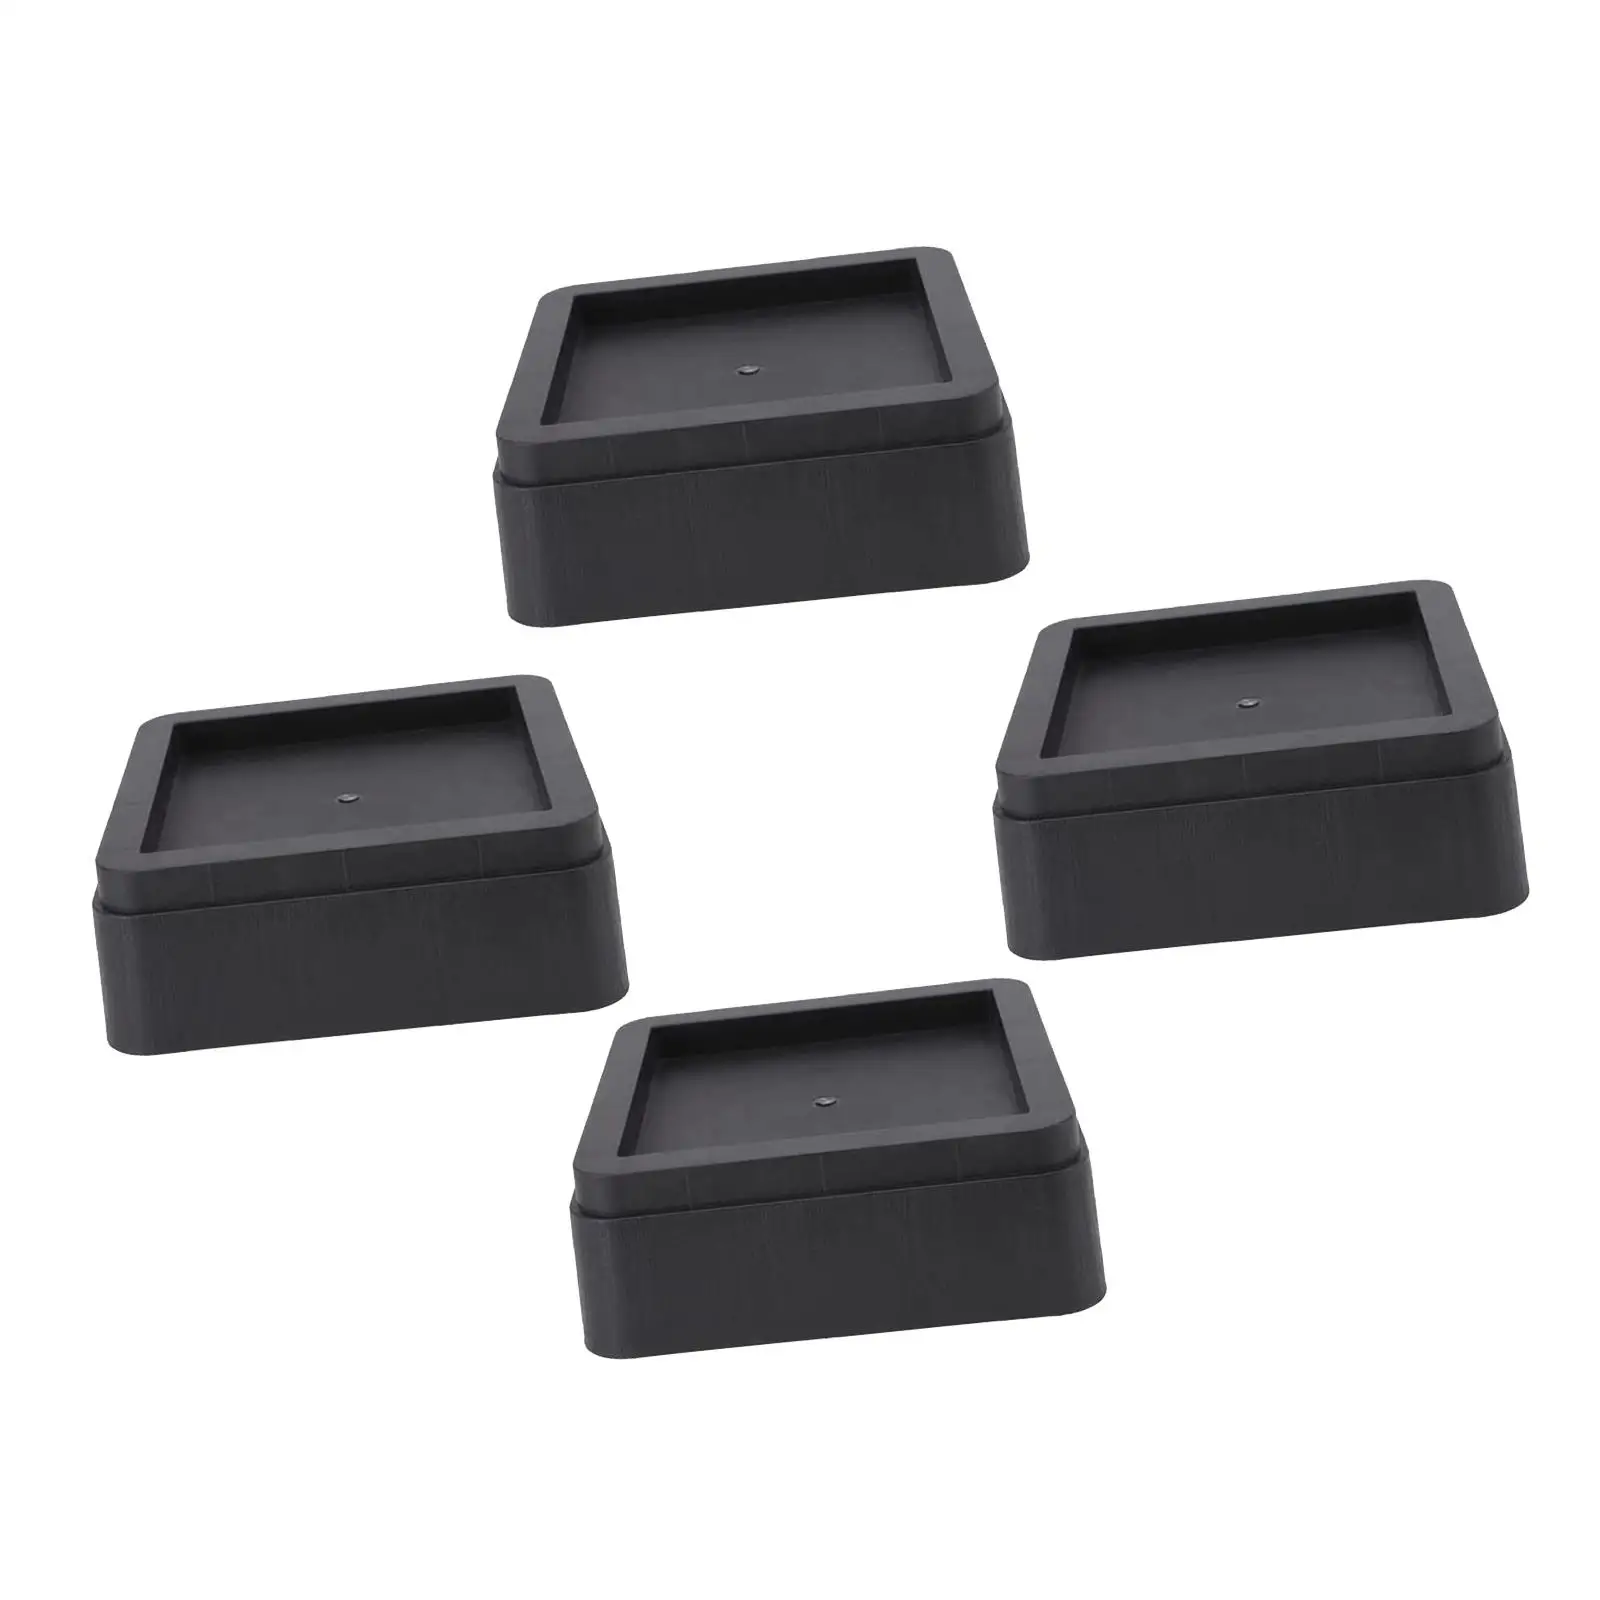 4Pcs Bed Risers Furniture Leg Risers Supports up to 11000 lbs Square Bed Raising Blocks for Sofa Couch Chair Washing Machine Bed